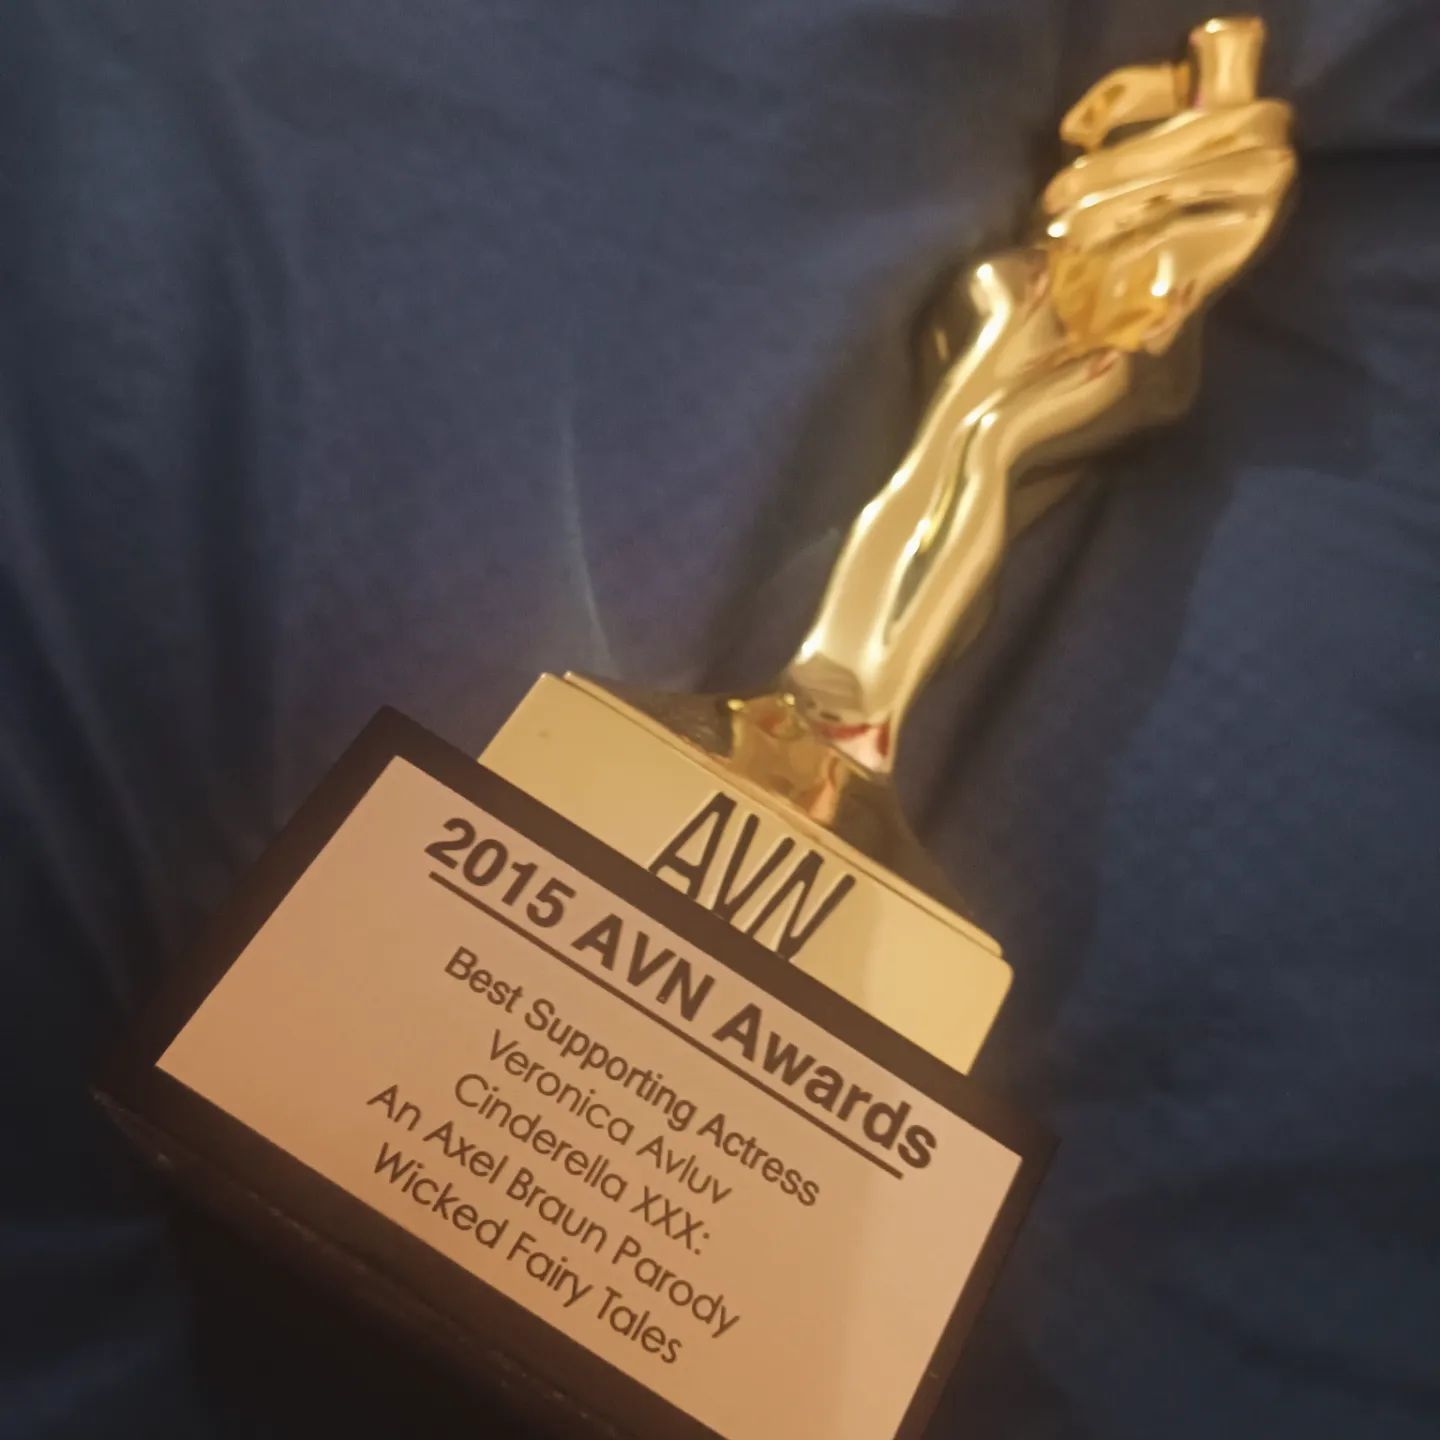 When I won this Award for Best Supporting Actress in 2015 at AVN I was shocked and quite unprepared to be honest. I had mixed feelings at the time as I had worked so hard in other ways to be a boundary pusher, to prove my age didn't predispose me to being a MILF. I was a very hardcore performer, doing things some girls much younger weren't even capable of doing. Now looking back, I'm so grateful this is the award I won. I studied and rehearsed with my dear friend Billy Morano ceaselessly to have this evil character down pat, not just the endless pages of lines. I see this award now as a symbol, not of what I was, but who I will become when I set my mind, heart and body to my goals. Those years were hard on me as I had lost my dear husband Hans in 2013, I look back and wonder how I pushed through. This award is a reminder that the human spirit is indomitable, I can, and will rise to new heights. I appreciate all of you who have stuck with me through the years. Without you, and without this spirit of fire inside me, I would not be here to tell this tale. Love you all. 🙏❣️🔥♐💯